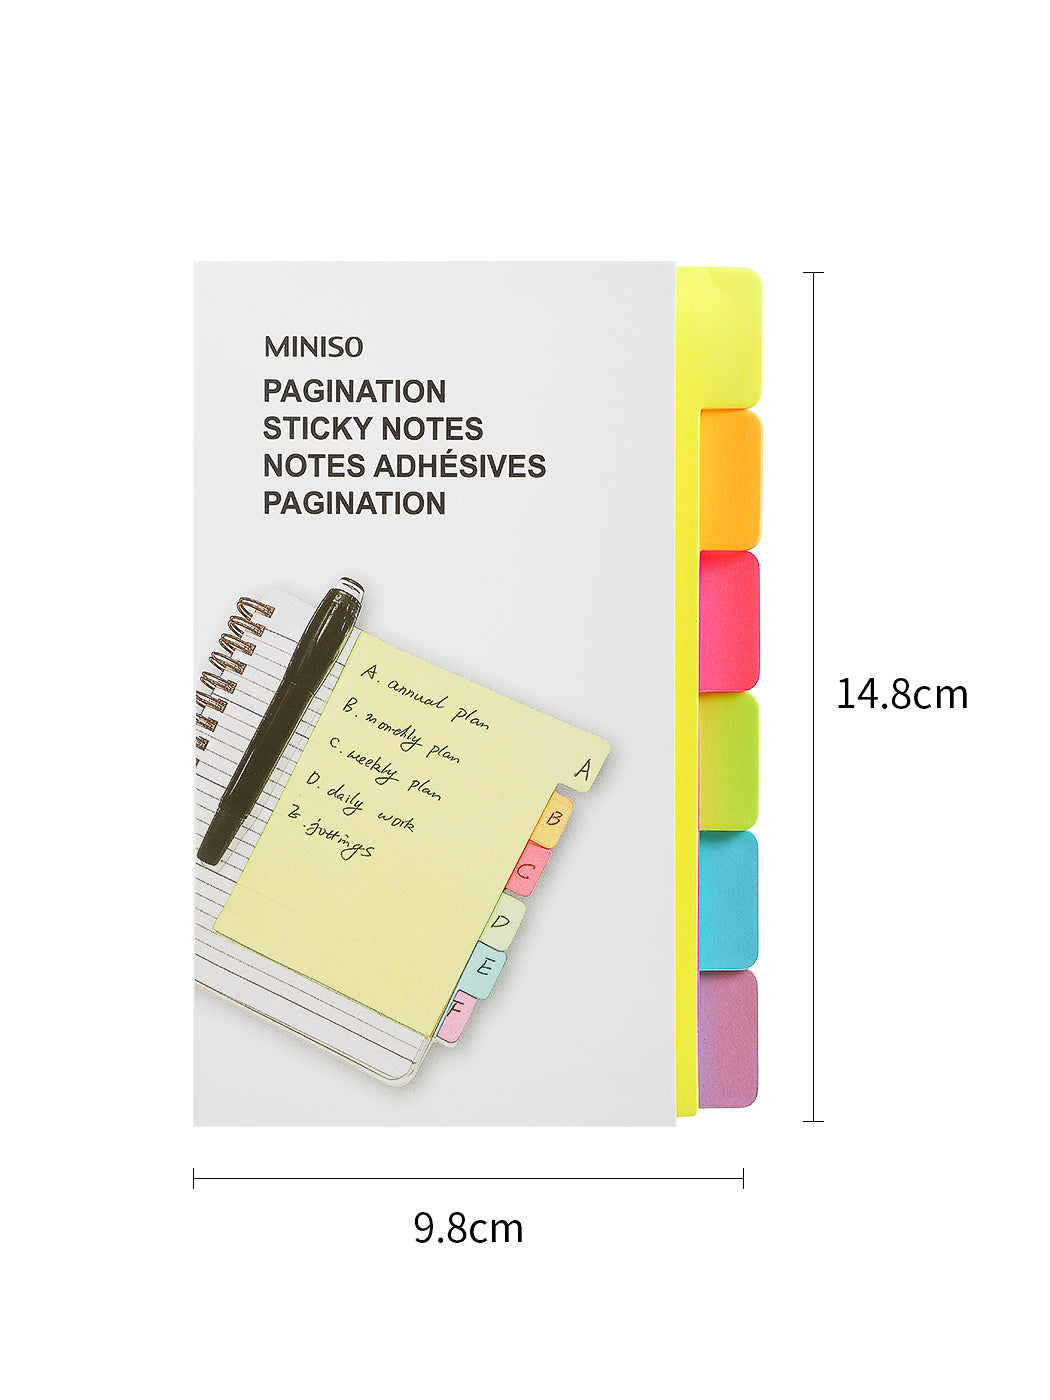 MINISO PAGINATION STICKY NOTES(6 COLORS) 2008674610103 STATIONERY